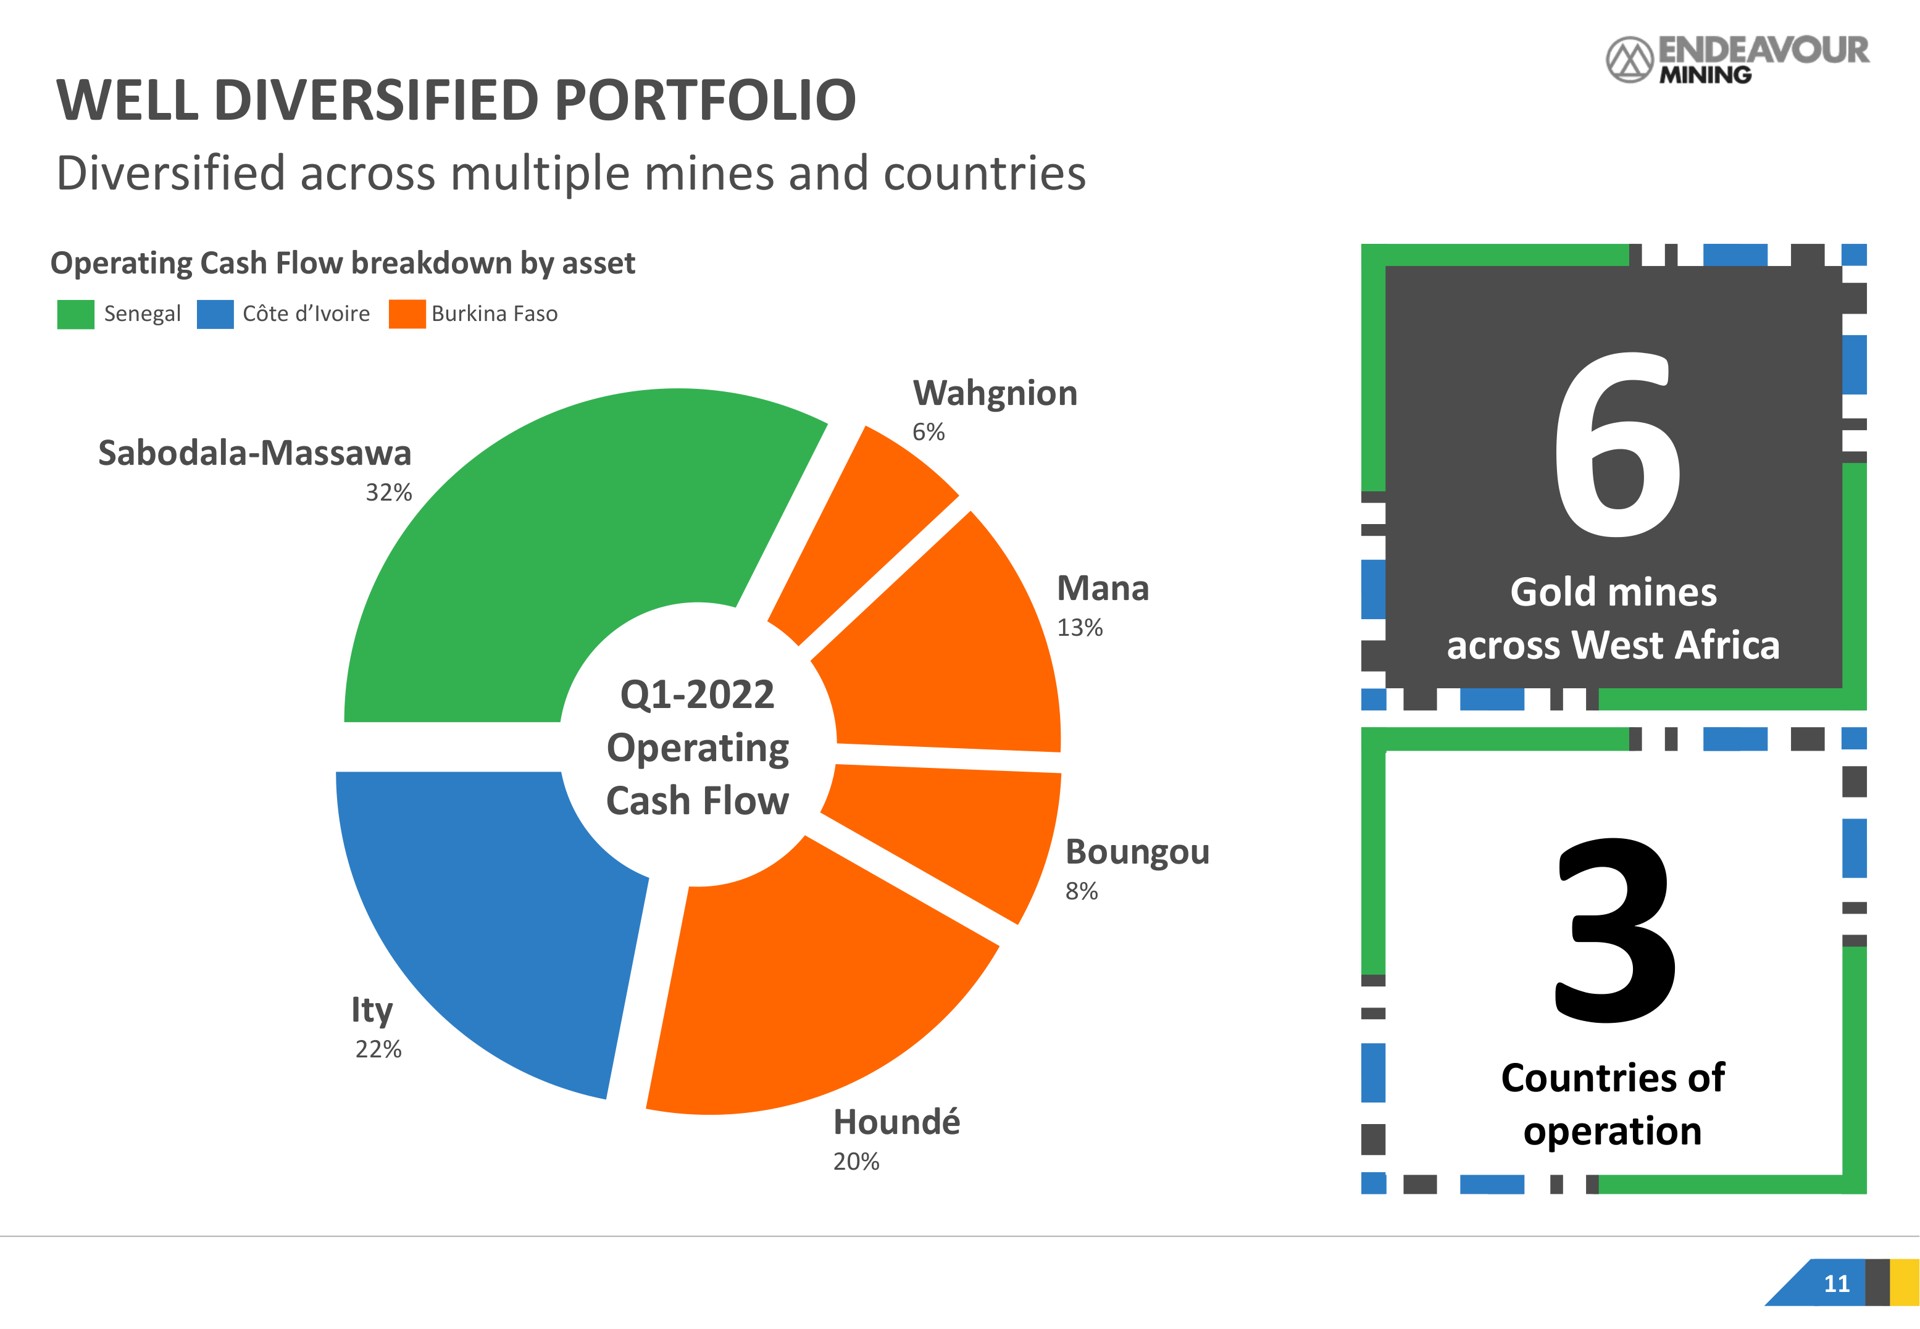 well diversified portfolio diversified across multiple mines and countries | Endeavour Mining